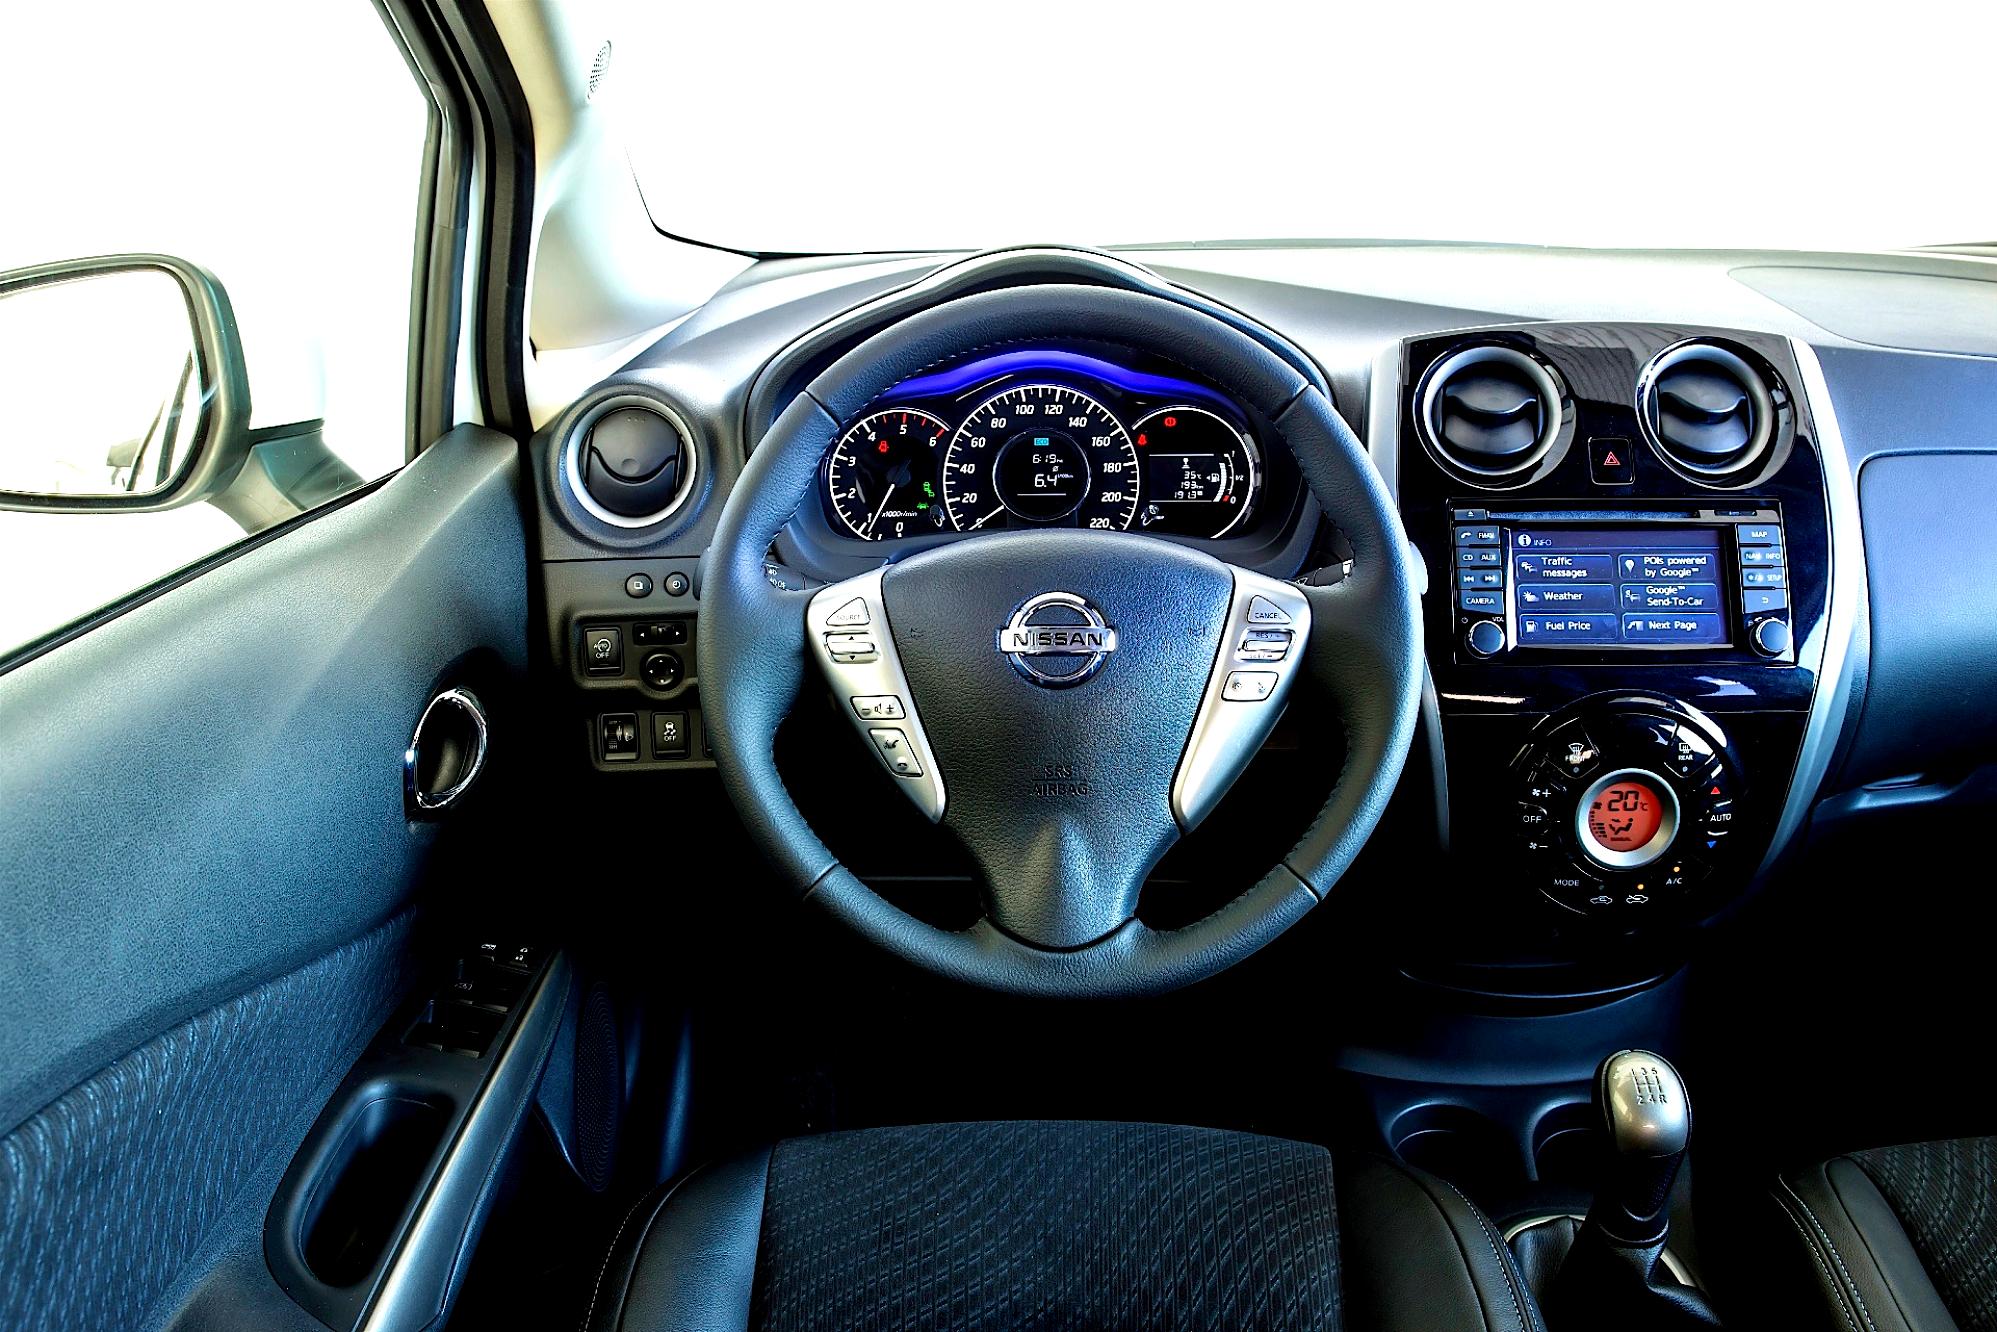 Nissan Note 2013 #89